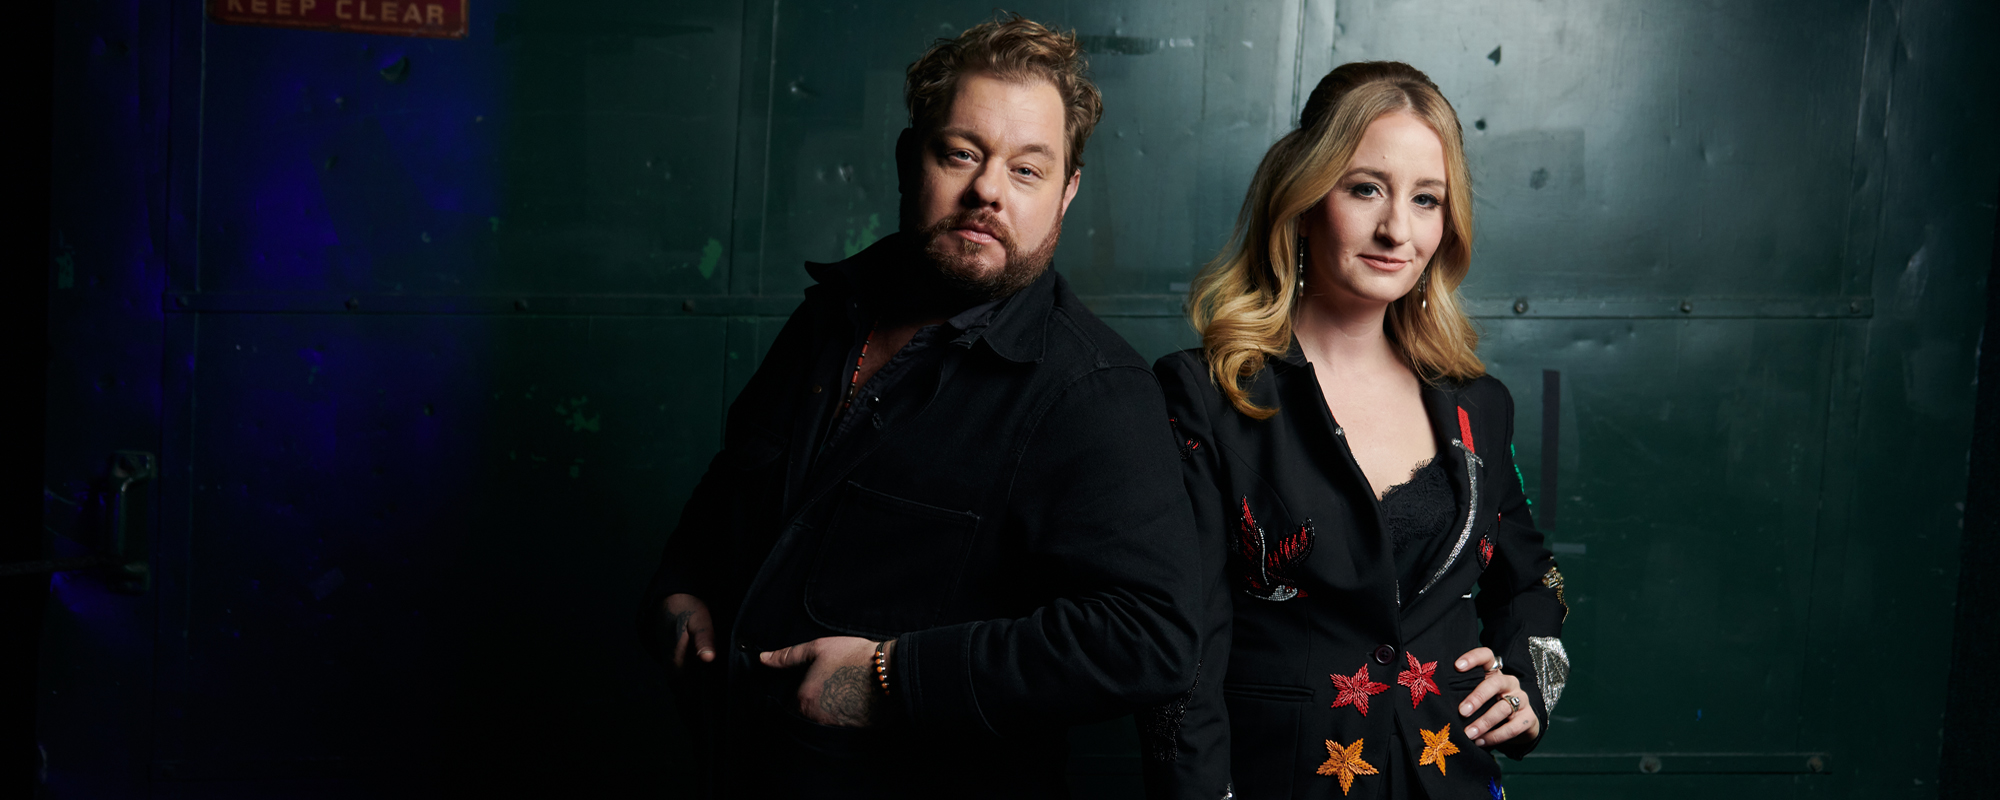 Exclusive: Nathaniel Rateliff and Margo Price Collaborate on Price’s “Twinkle, Twinkle” for ‘CMT Crossroads’